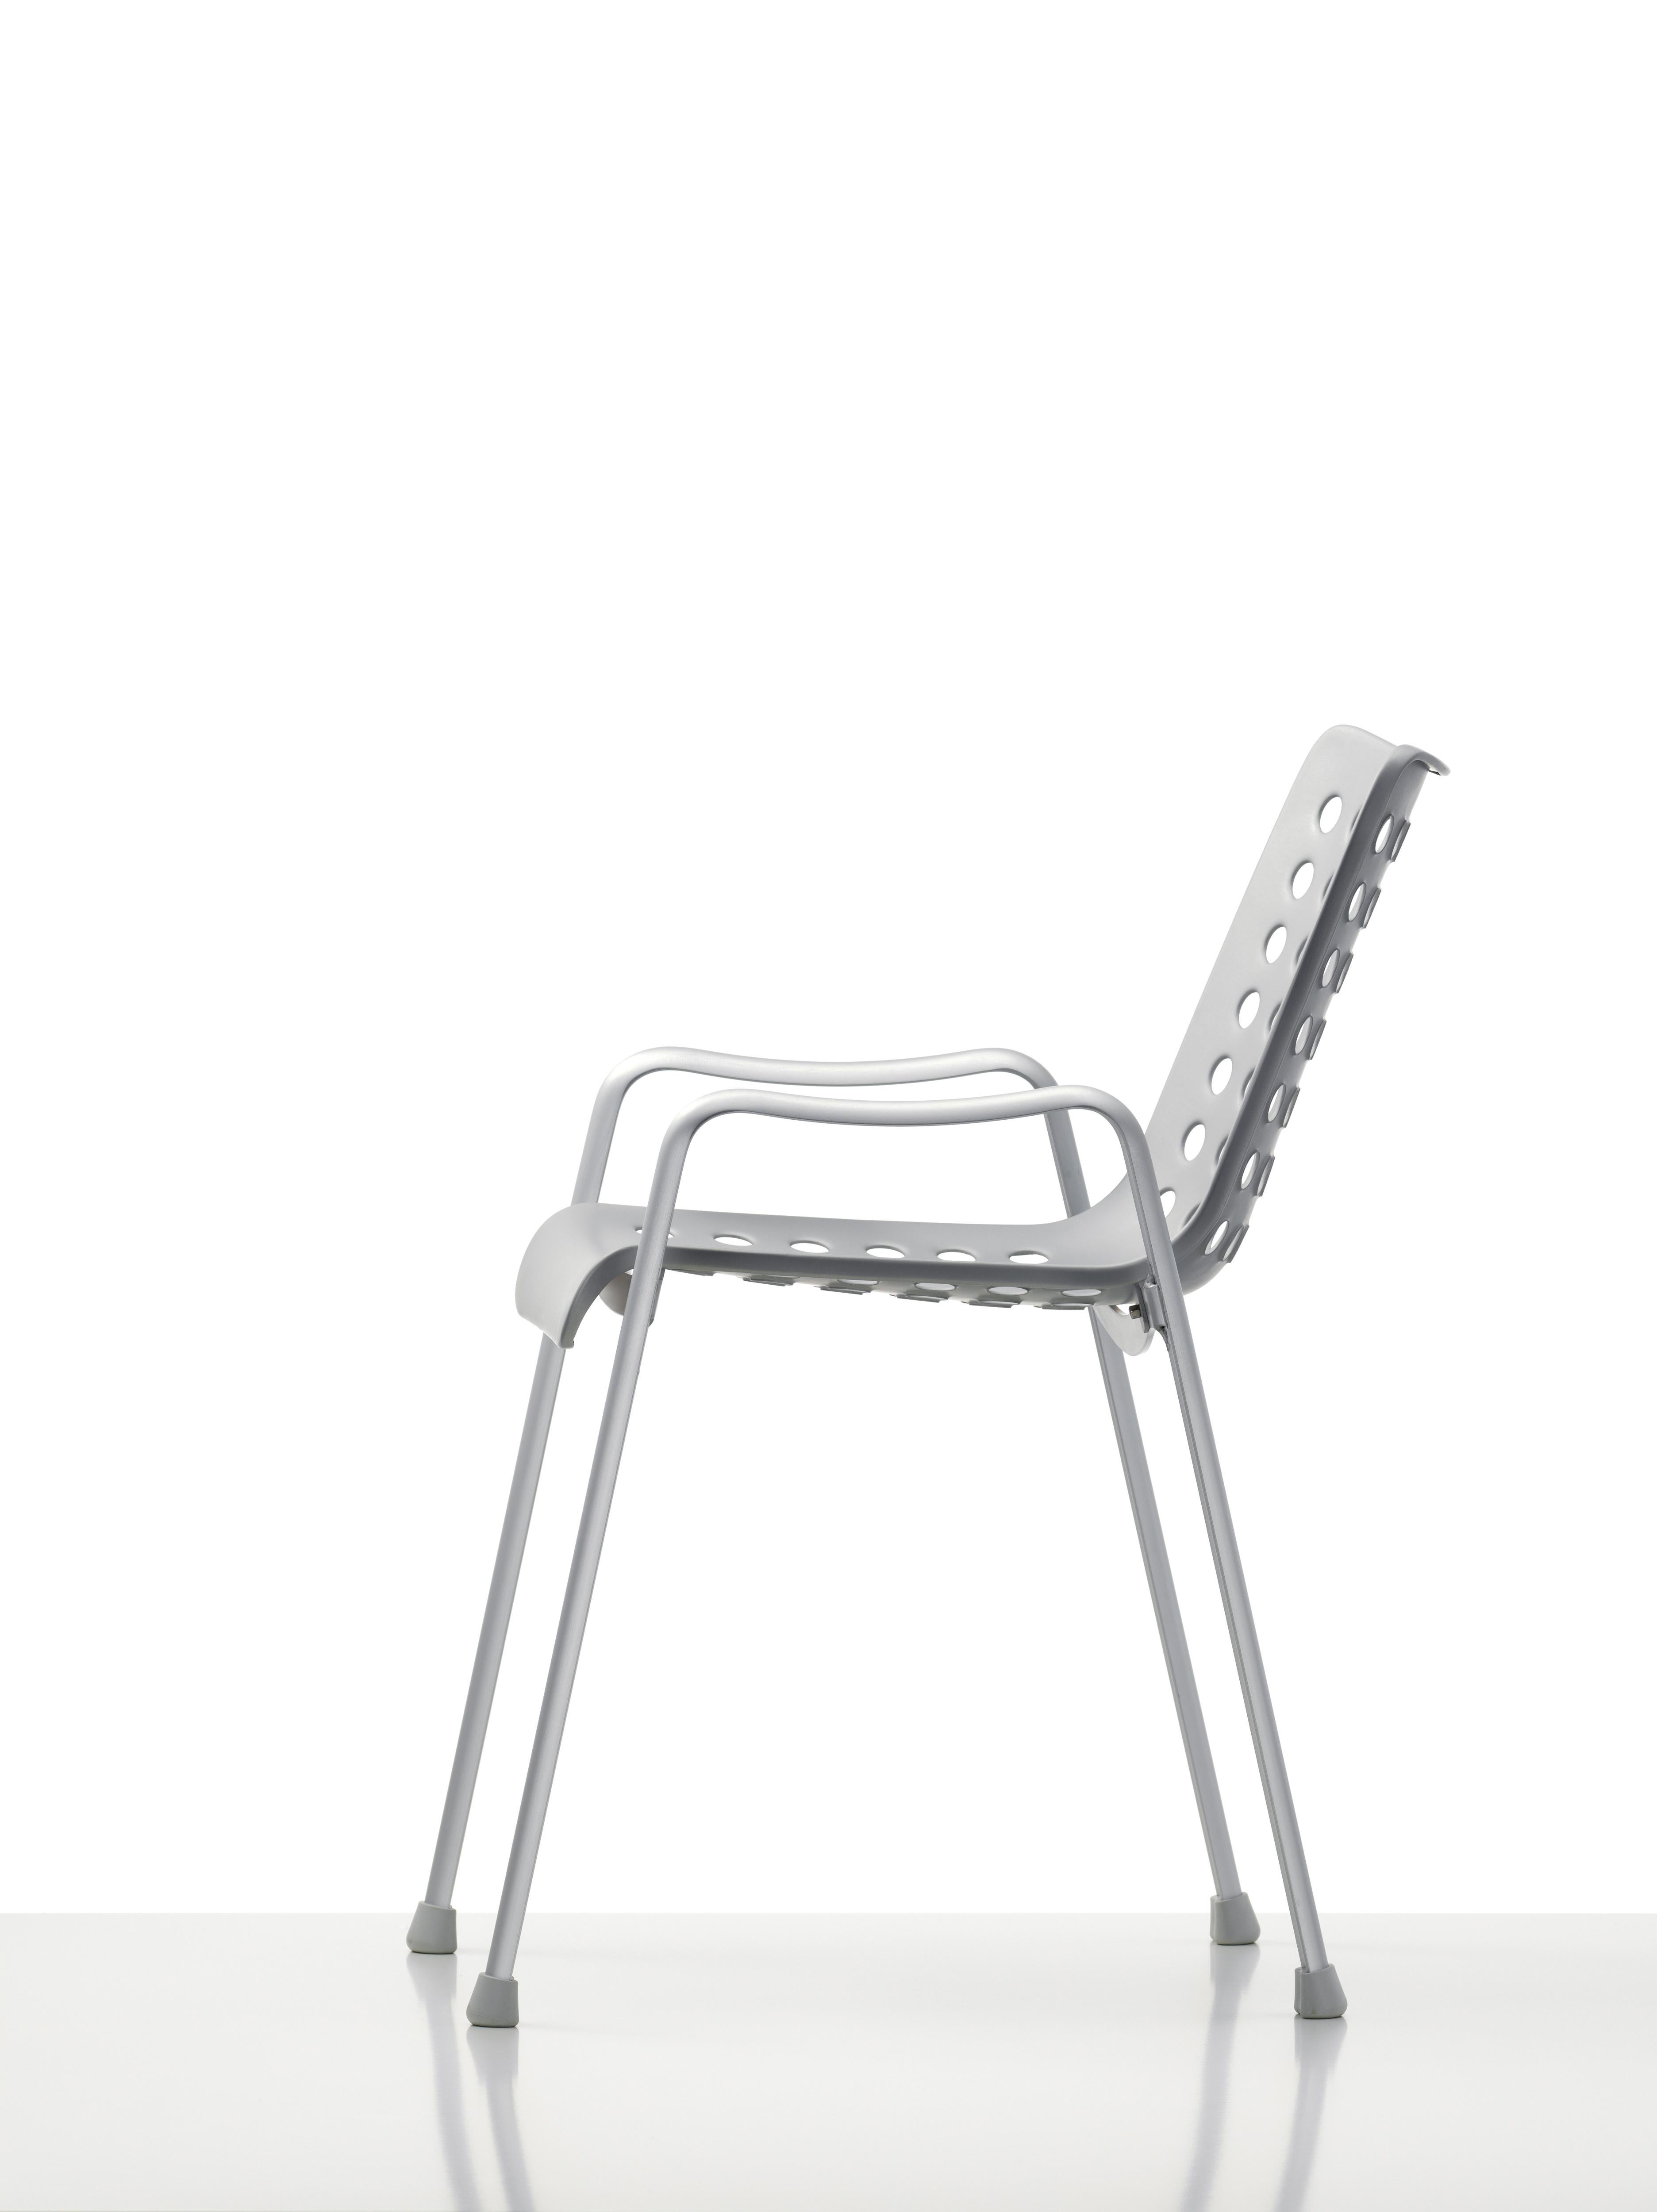 Modern Vitra Landi Chair in Matte Anodized Aluminum by Hans Coray For Sale